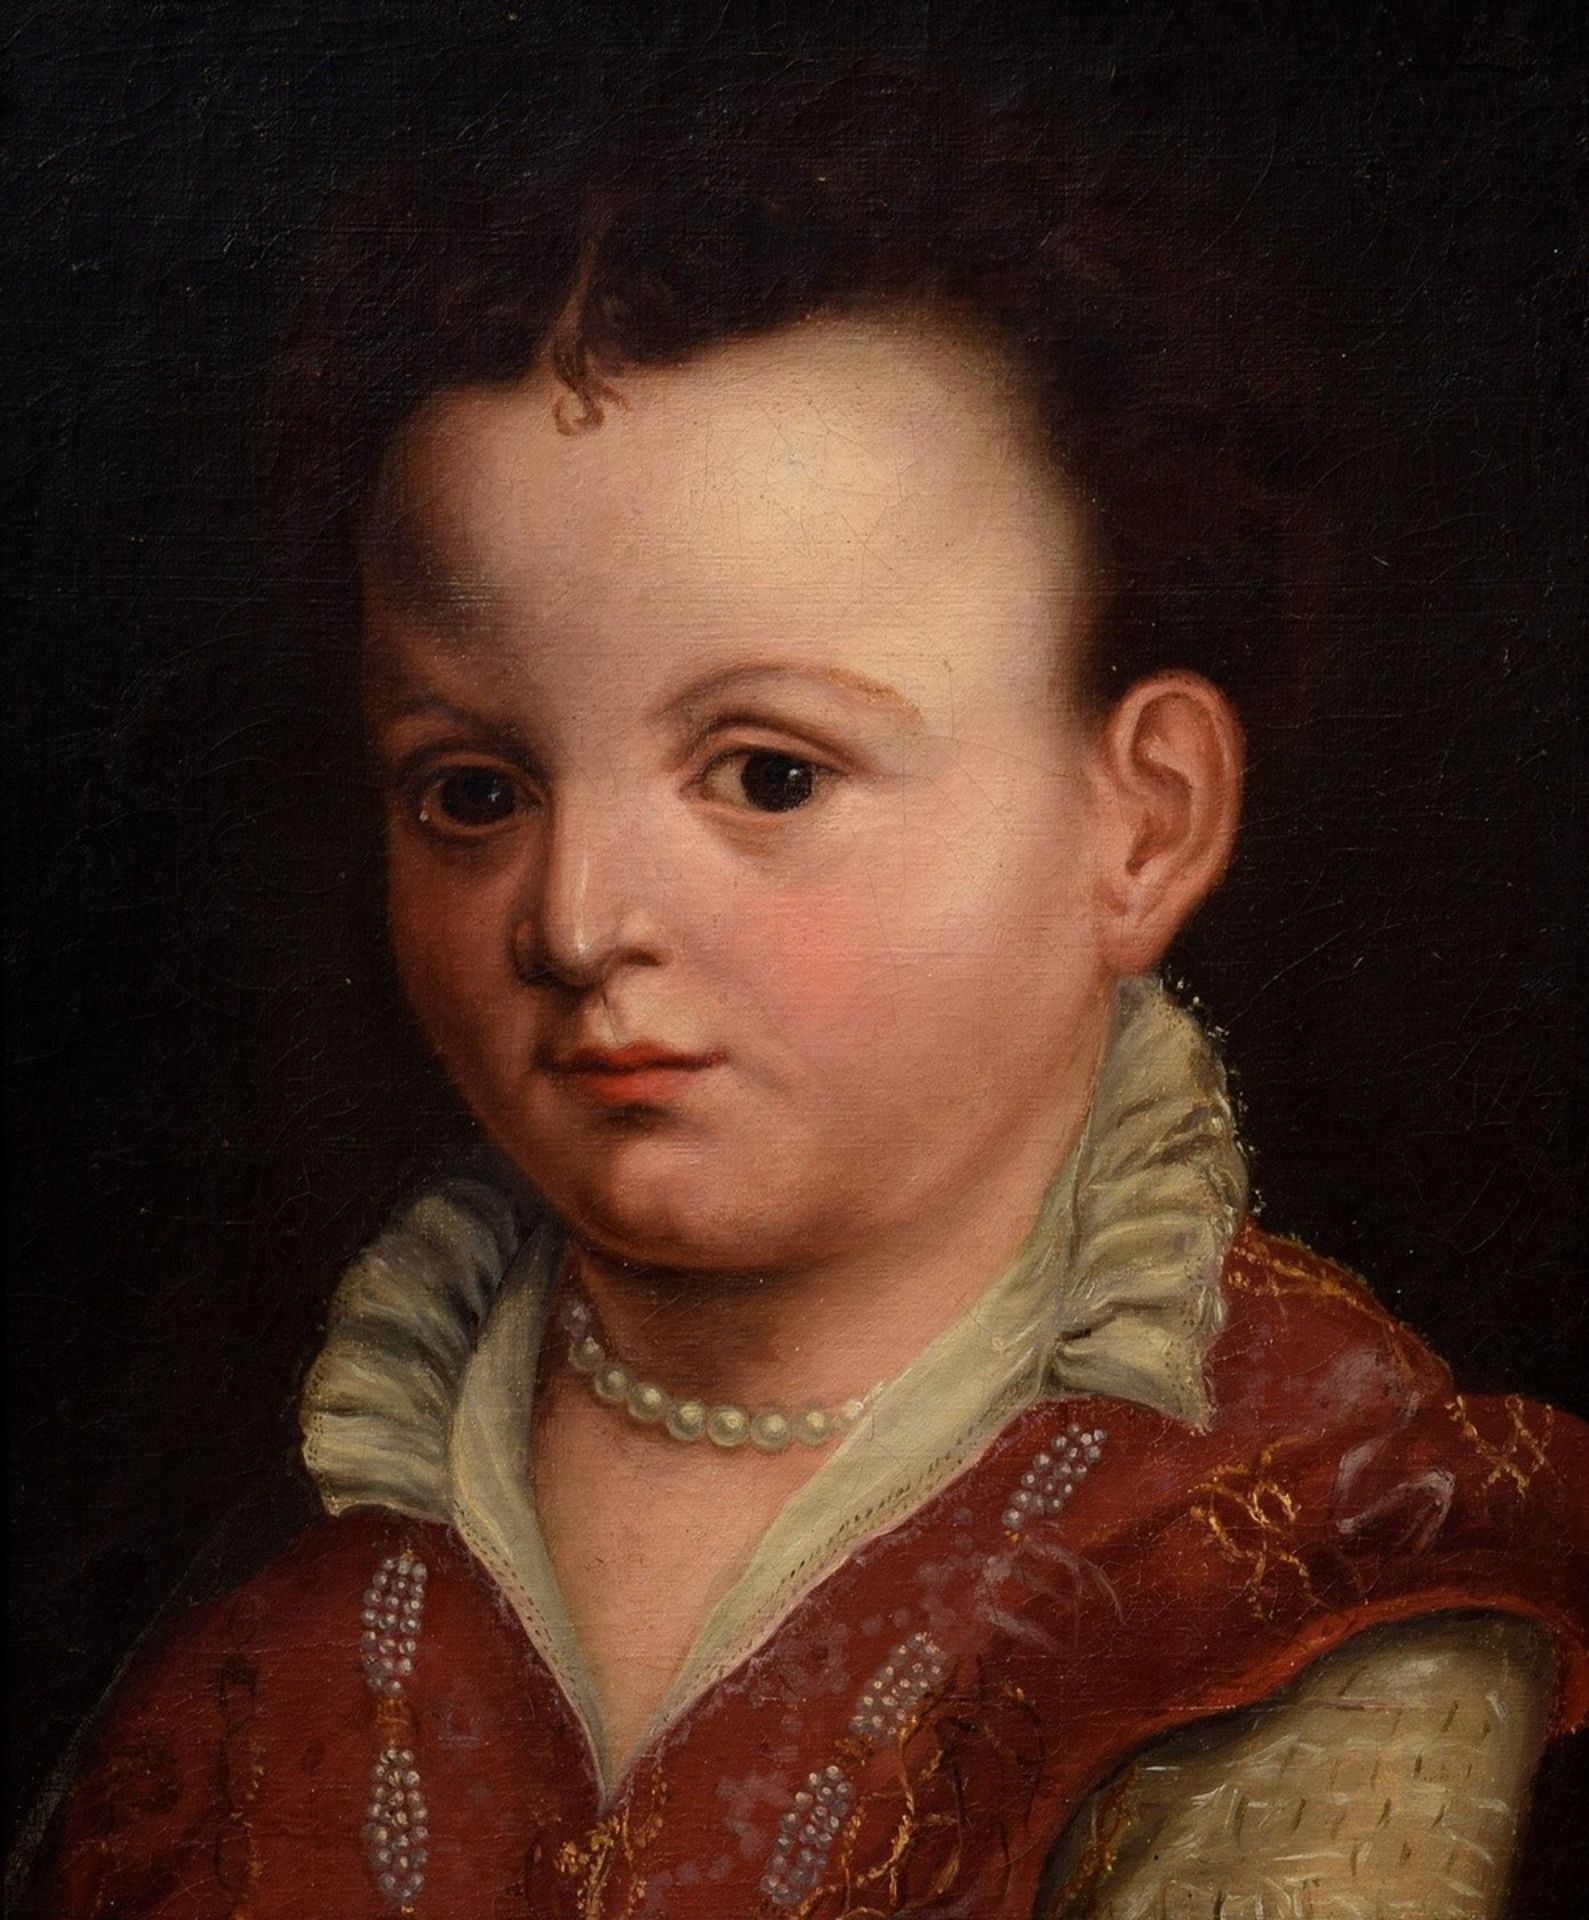 Unknown copyist after Titian "Portrait of a Child", oil/canvas, mounted on panel, 16th c., in decor - Image 2 of 3